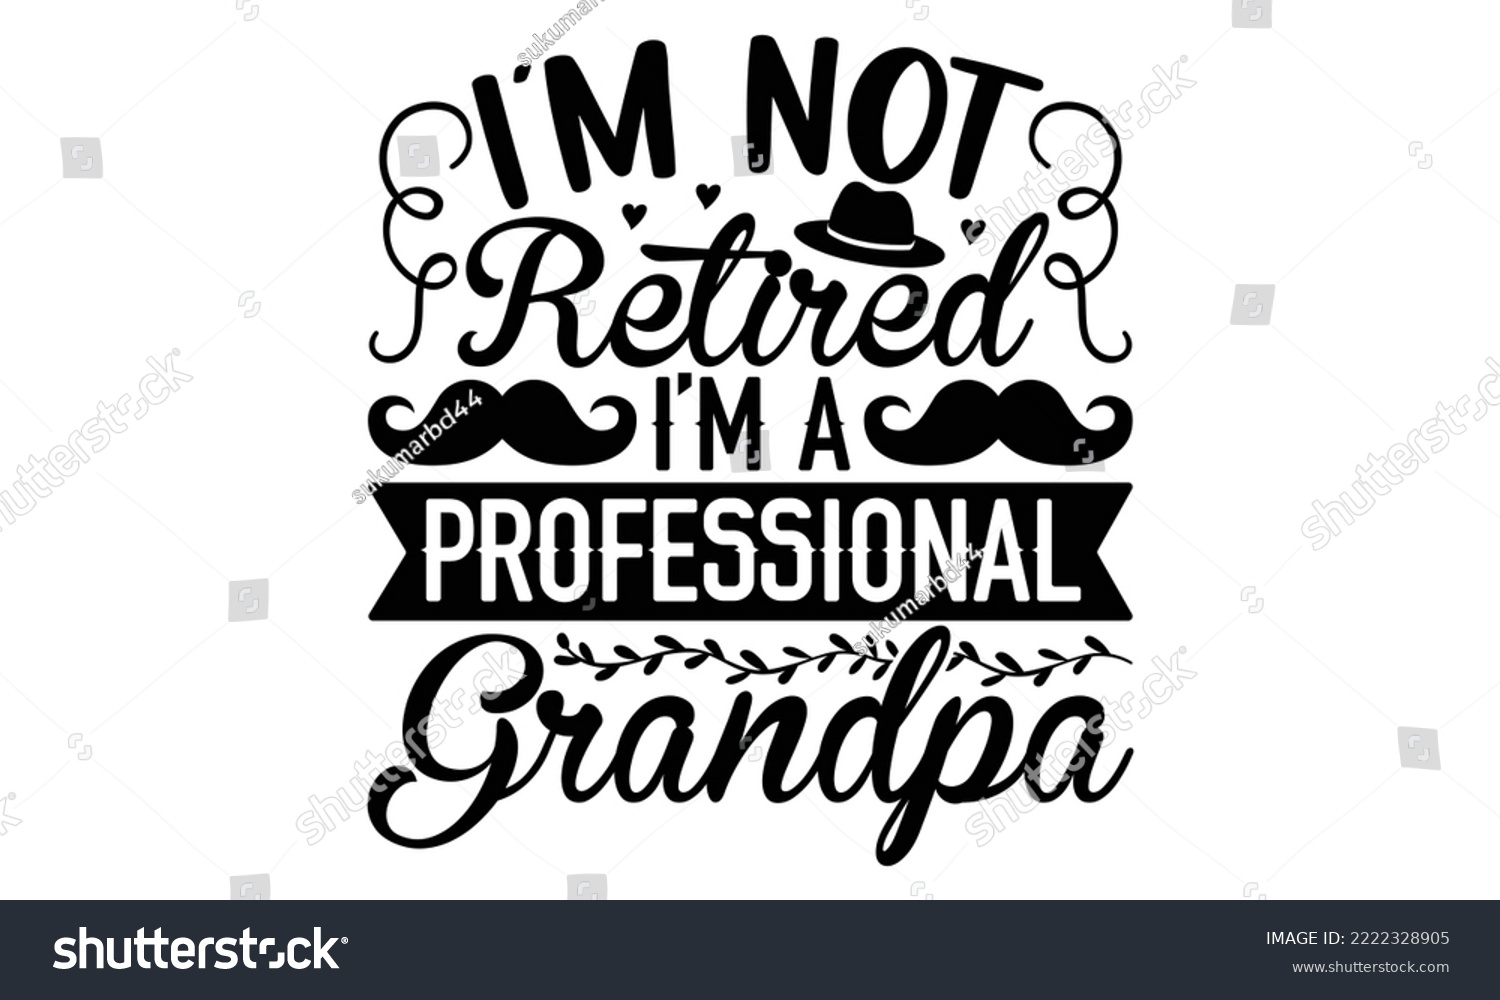 SVG of I’m Not Retired I’m A Professional Grandpa - Retirement t-shirt design, Hand drawn lettering phrase, Calligraphy graphic design, eps, svg Files for Cutting svg